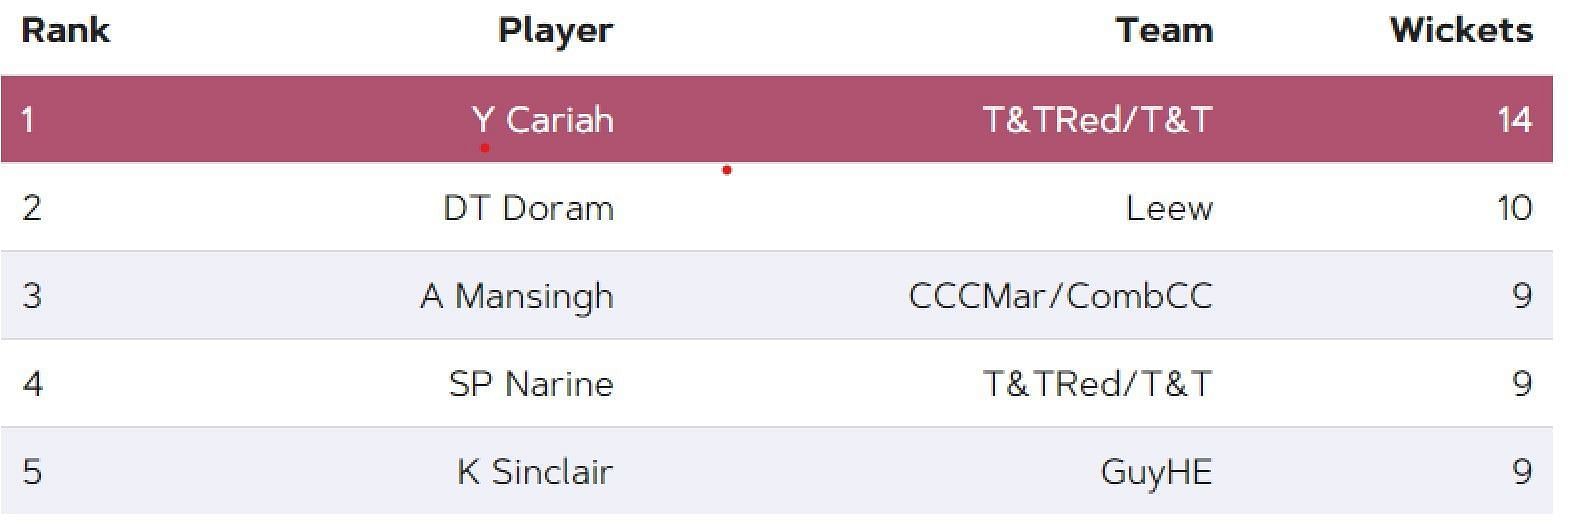 Most Wickets list after Match 19 (Image Courtesy: www.windiescricket.com)